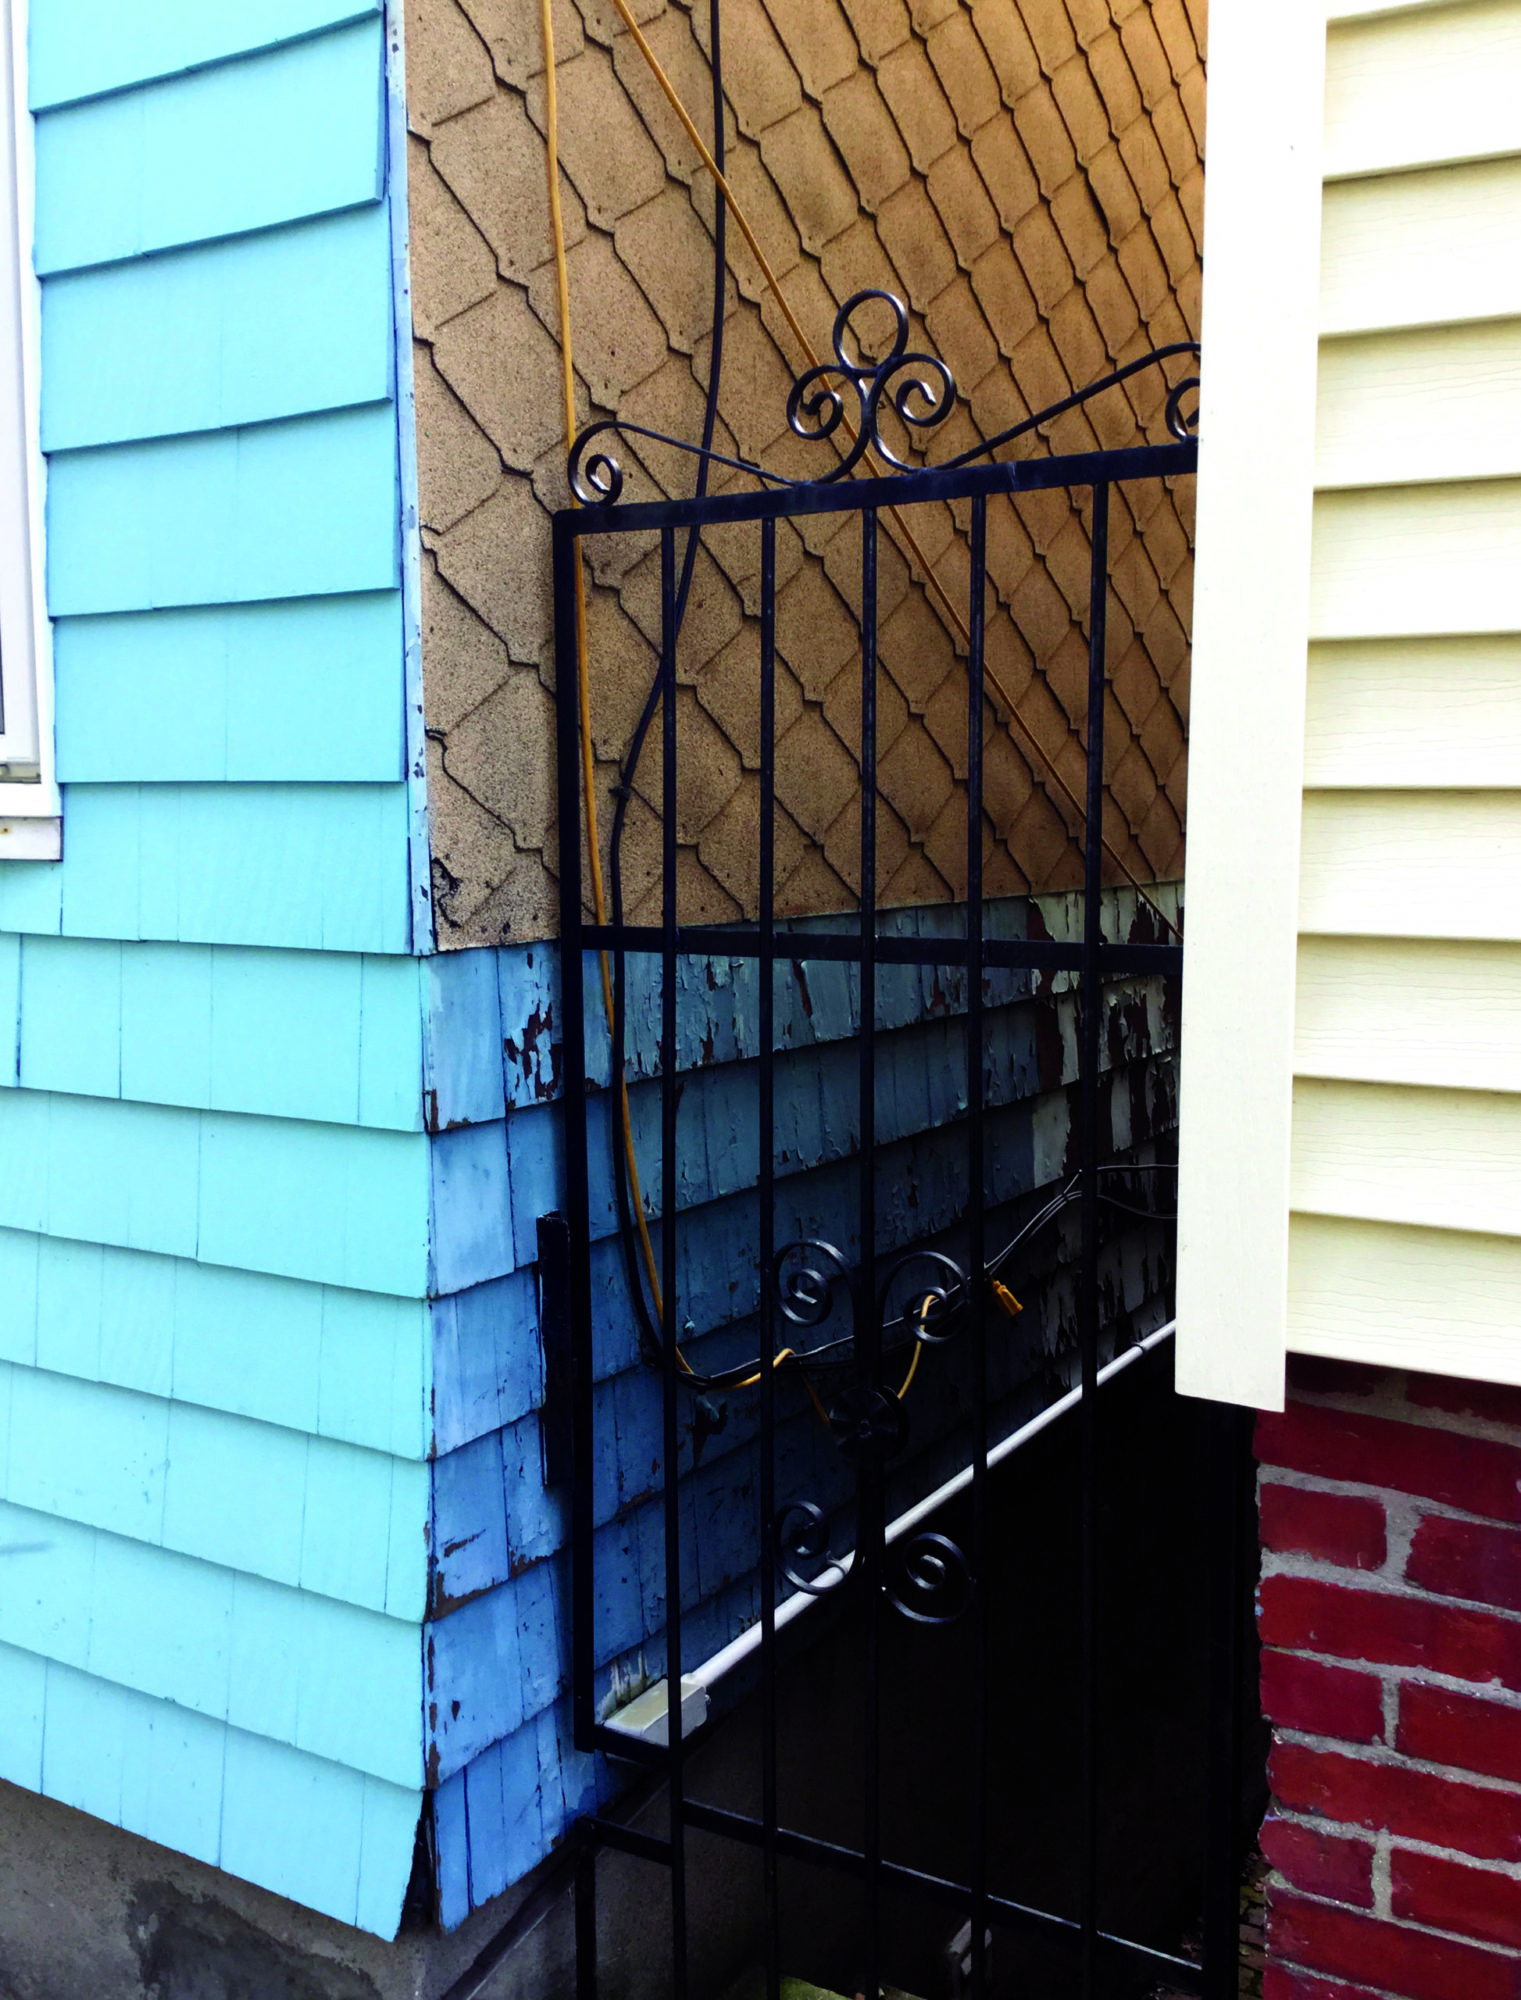 A closer shot of an iron fence blocking an alley between two buildings. The building on the left is blue and brown wood and the house on the right is white wood and red brick. The fence is black. Wires go down the sides of the buildings, leading behind the fence.